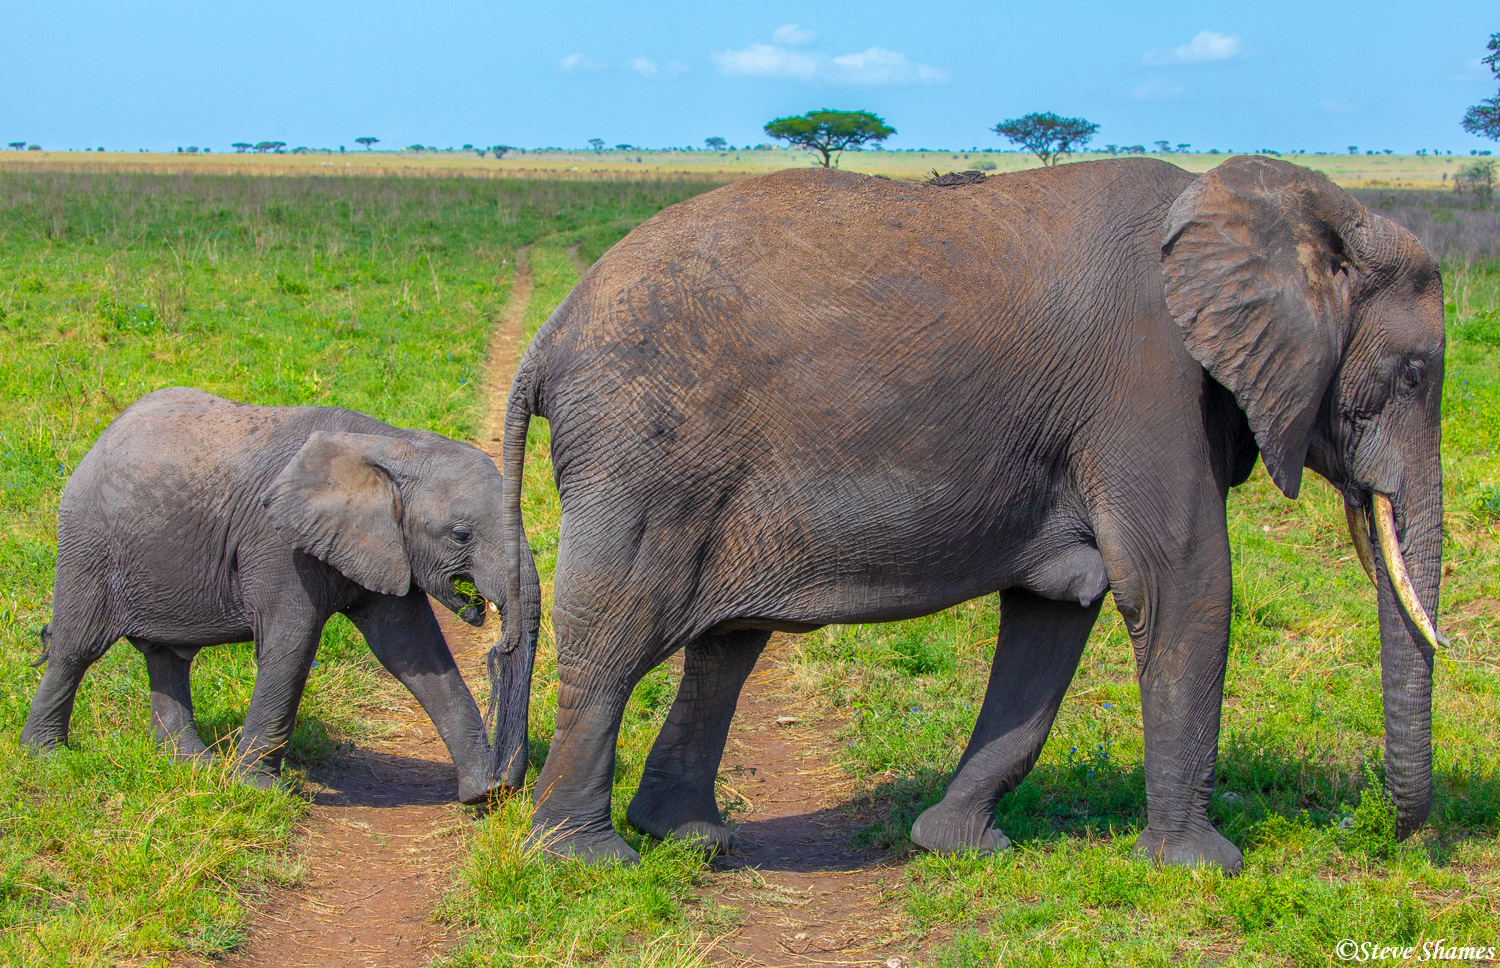 Mother and calf elephant crossing the road. Wherever the calf is, the mother is close by.